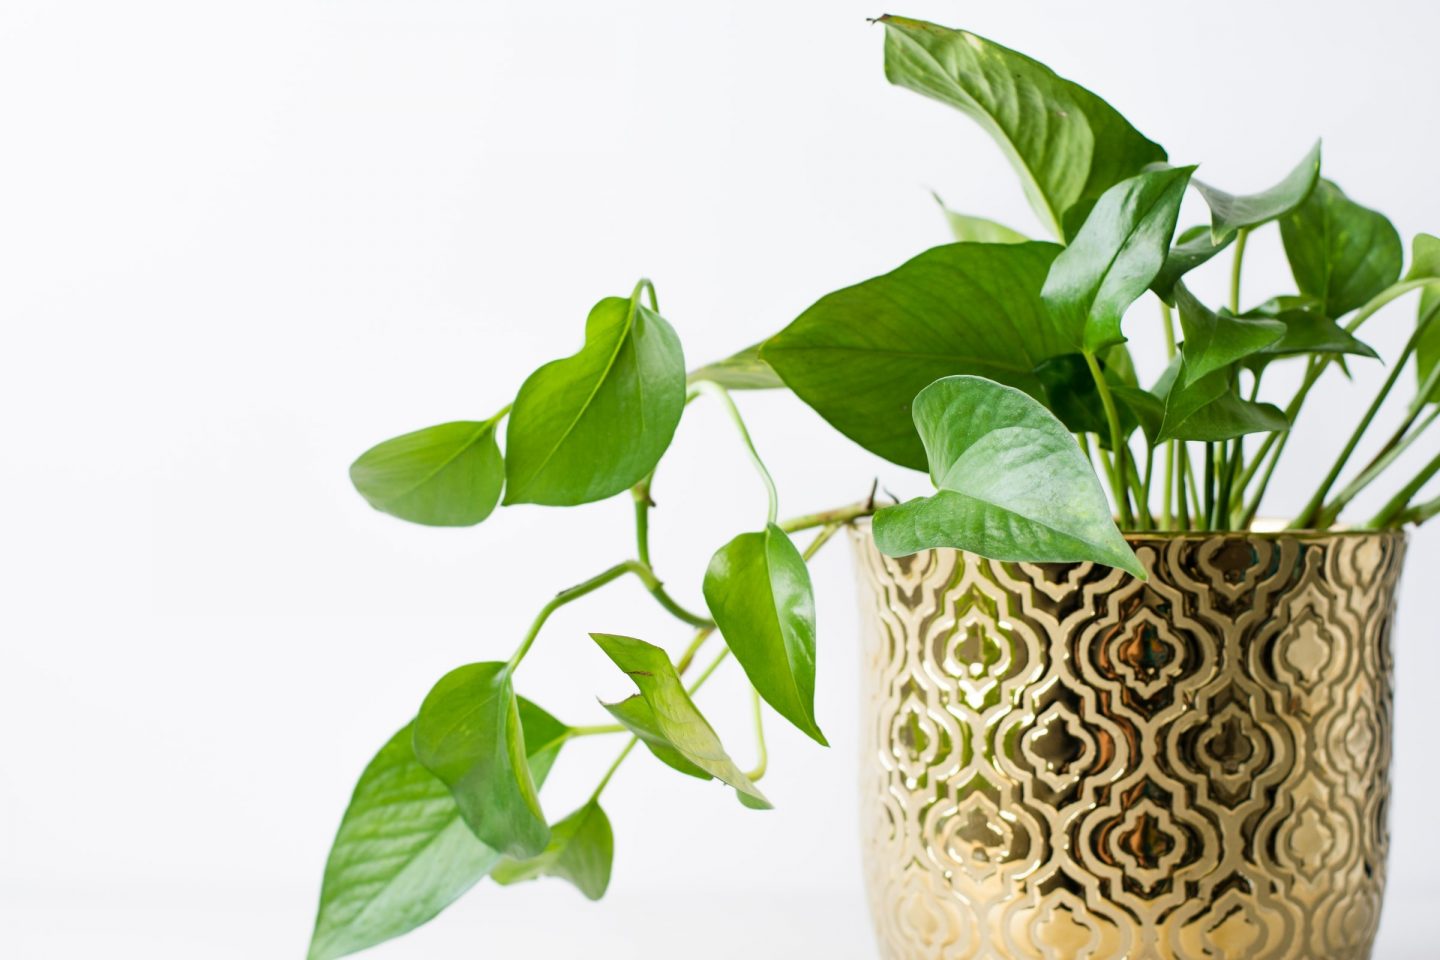 Pothos, also known as devil’s ivy, in a decorative gold pot